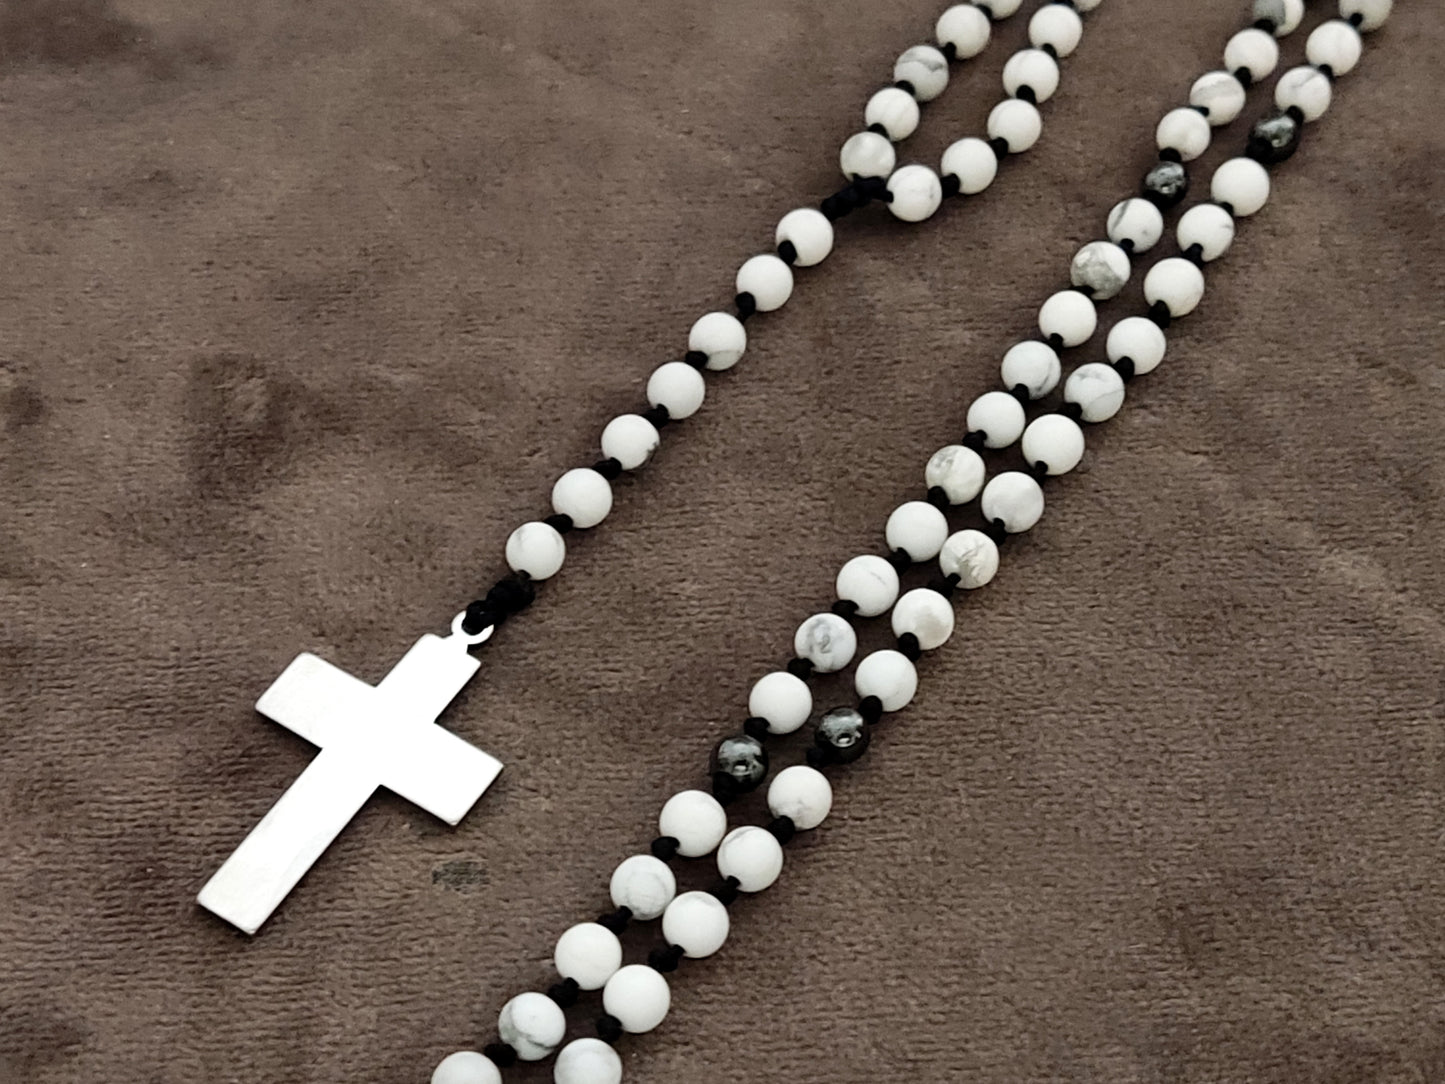 Handmade Rosary Necklace | Natural White Howlite and Hematite Stones | Stainless Steel Cross | Adjustable Length | Made in Greece